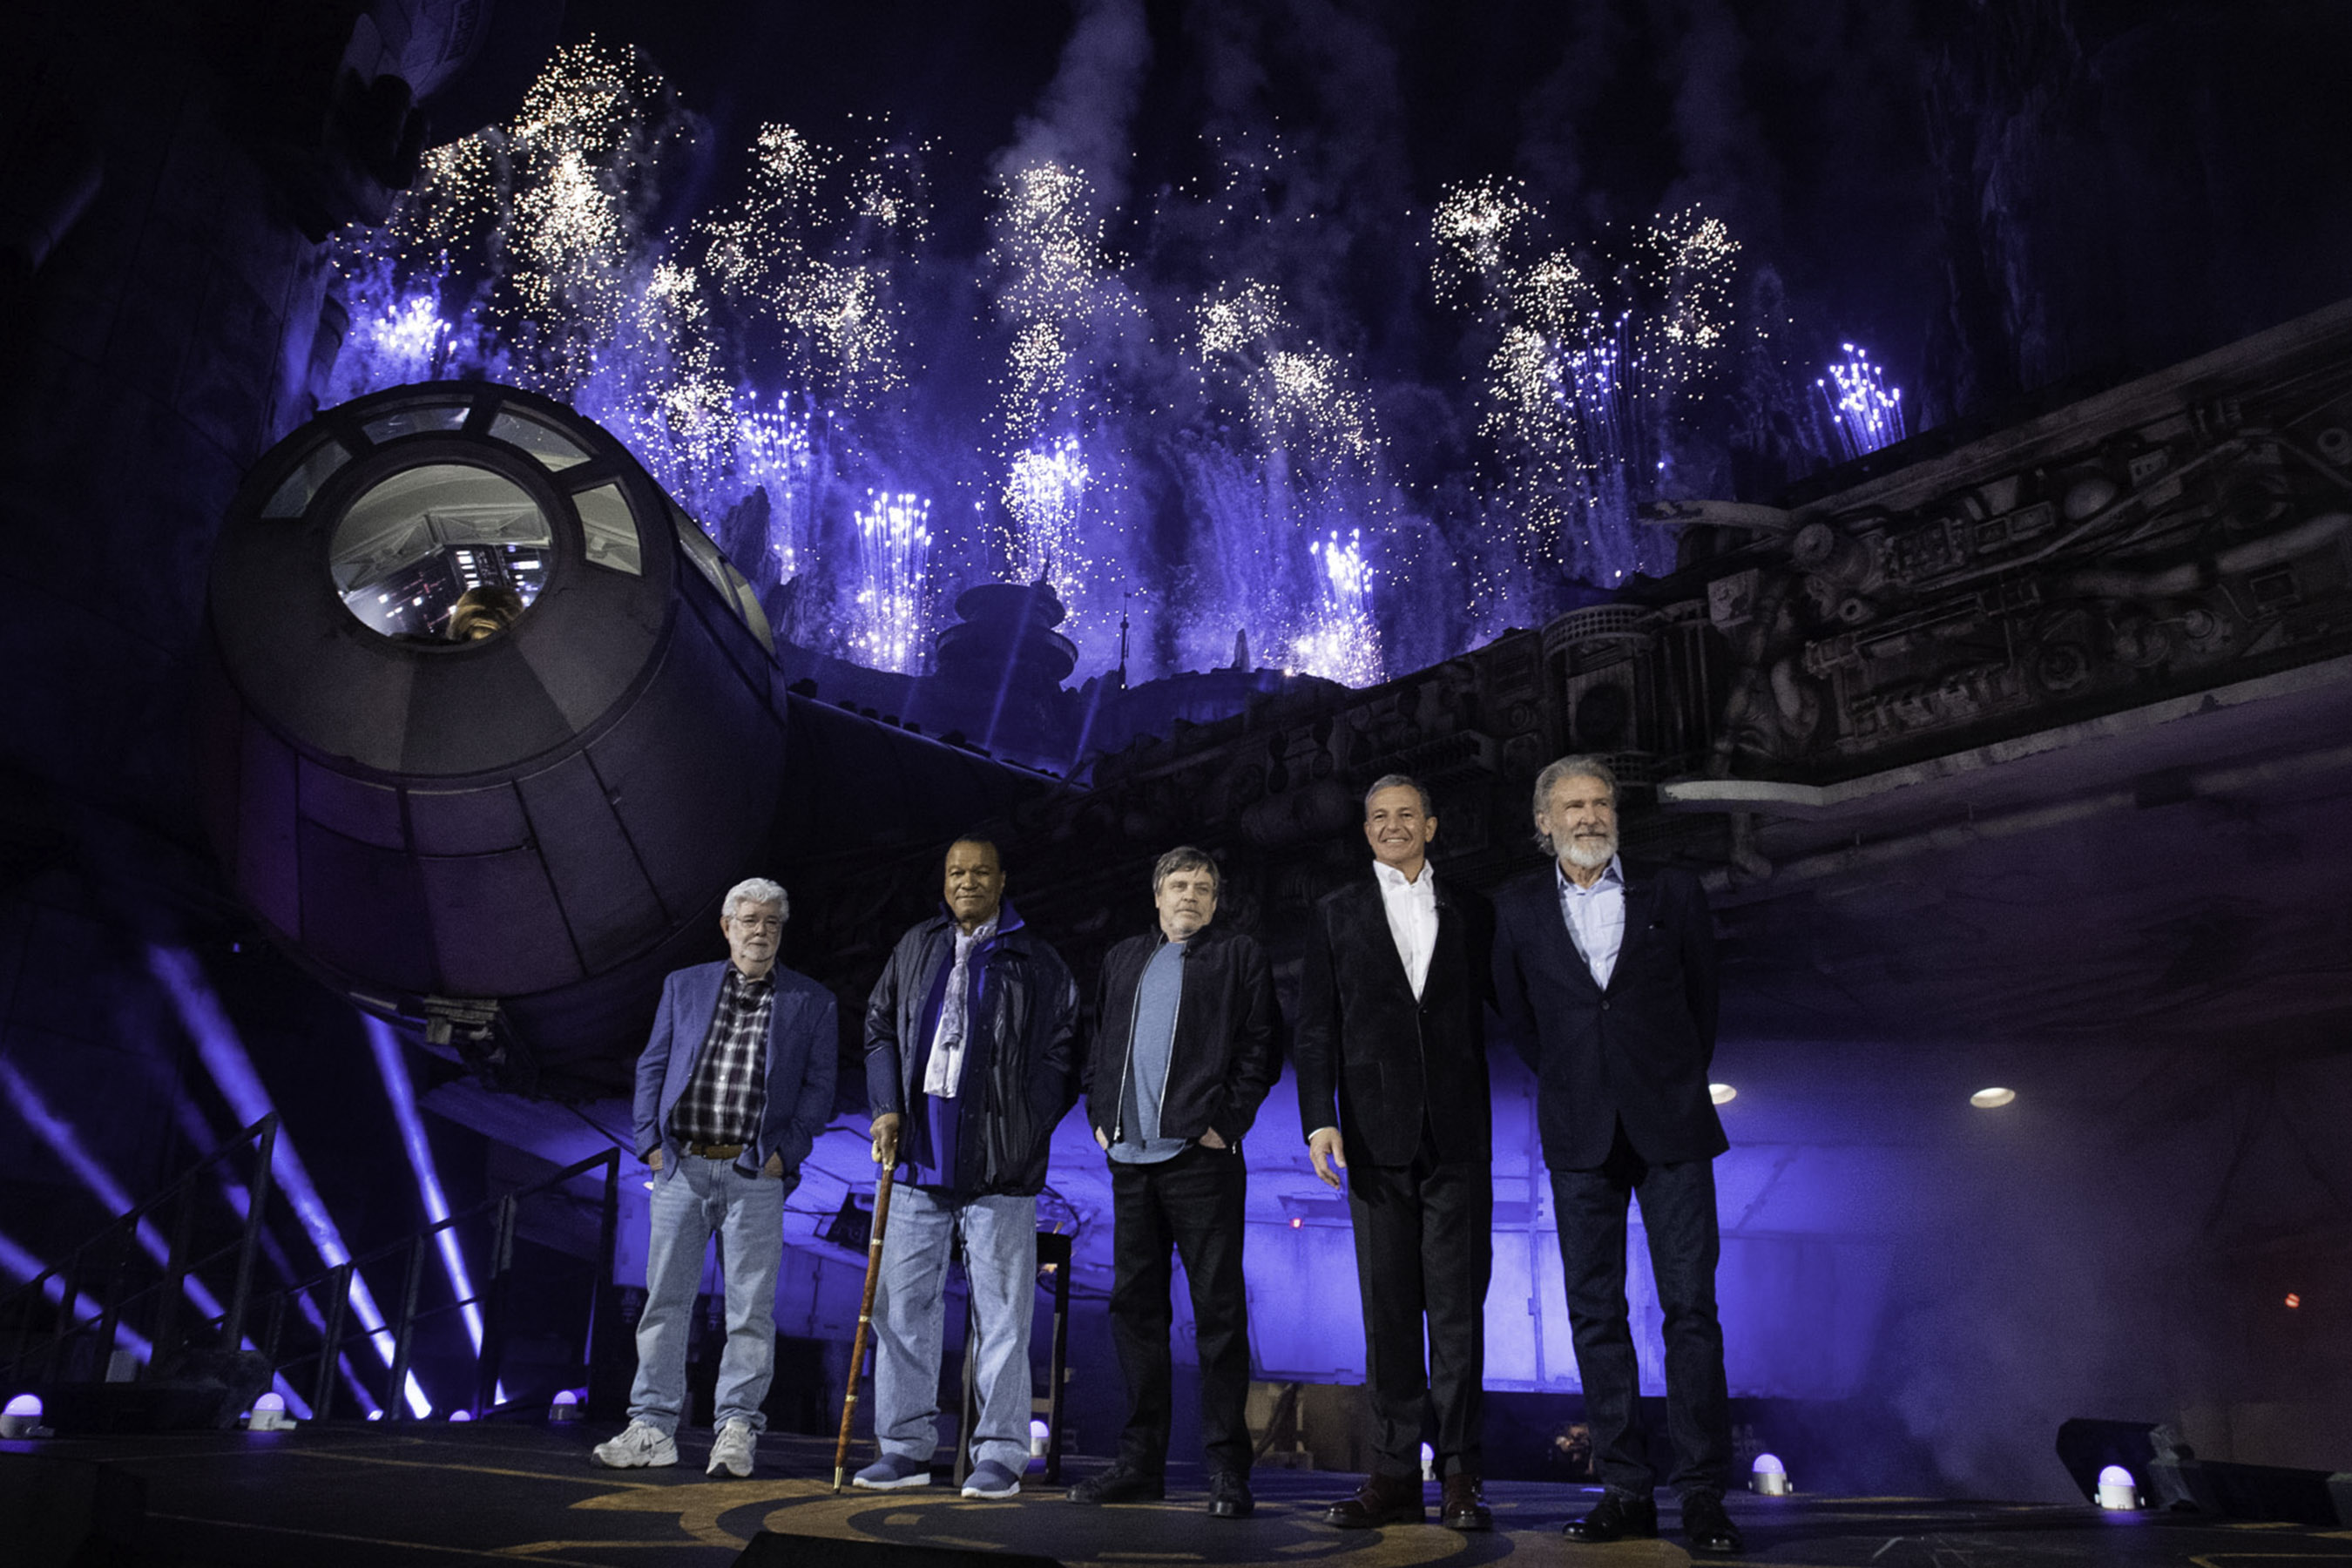 Star Wars: Galaxy’s Edge at Disneyland Park in Anaheim, California, lights up with galactic fanfare, May 29, 2019, as (l-r) Star Wars creator George Lucas, actors Billy Dee Williams, Mark Hamill, Walt Disney Company Chairman and CEO Bob Iger and actor Harrison Ford celebrate the opening Disney’s largest single-themed land expansion ever. Star Wars: Galaxy’s Edge opens May 31, 2019, at Disneyland Resort in California and Aug. 29, 2019, at Walt Disney World Resort in Florida. (Richard Harbaugh/Disneyland Resort)